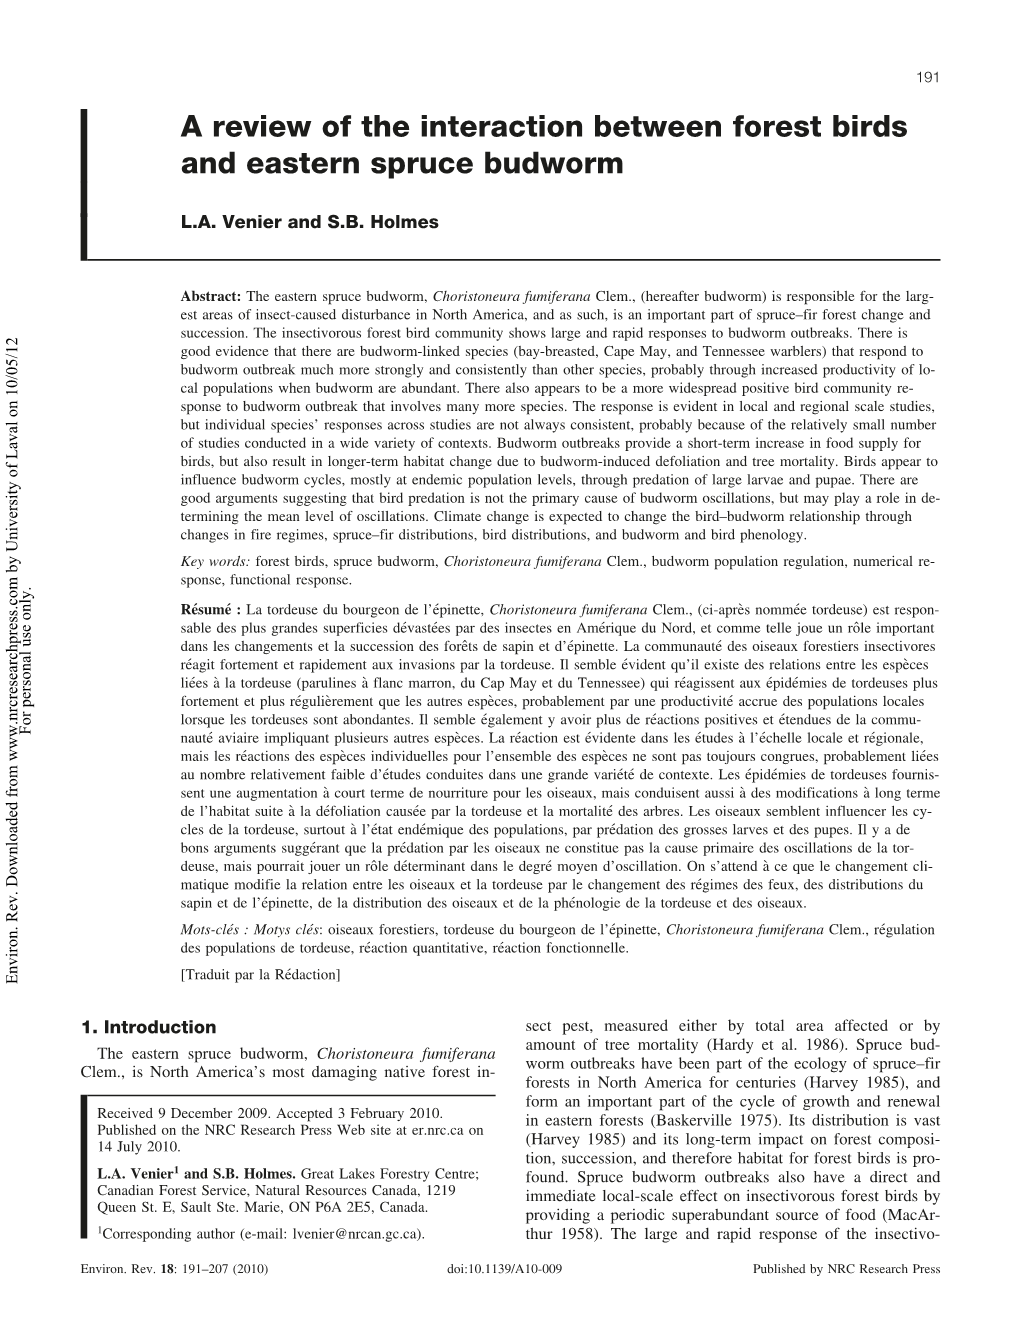 A Review of the Interaction Between Forest Birds and Eastern Spruce Budworm